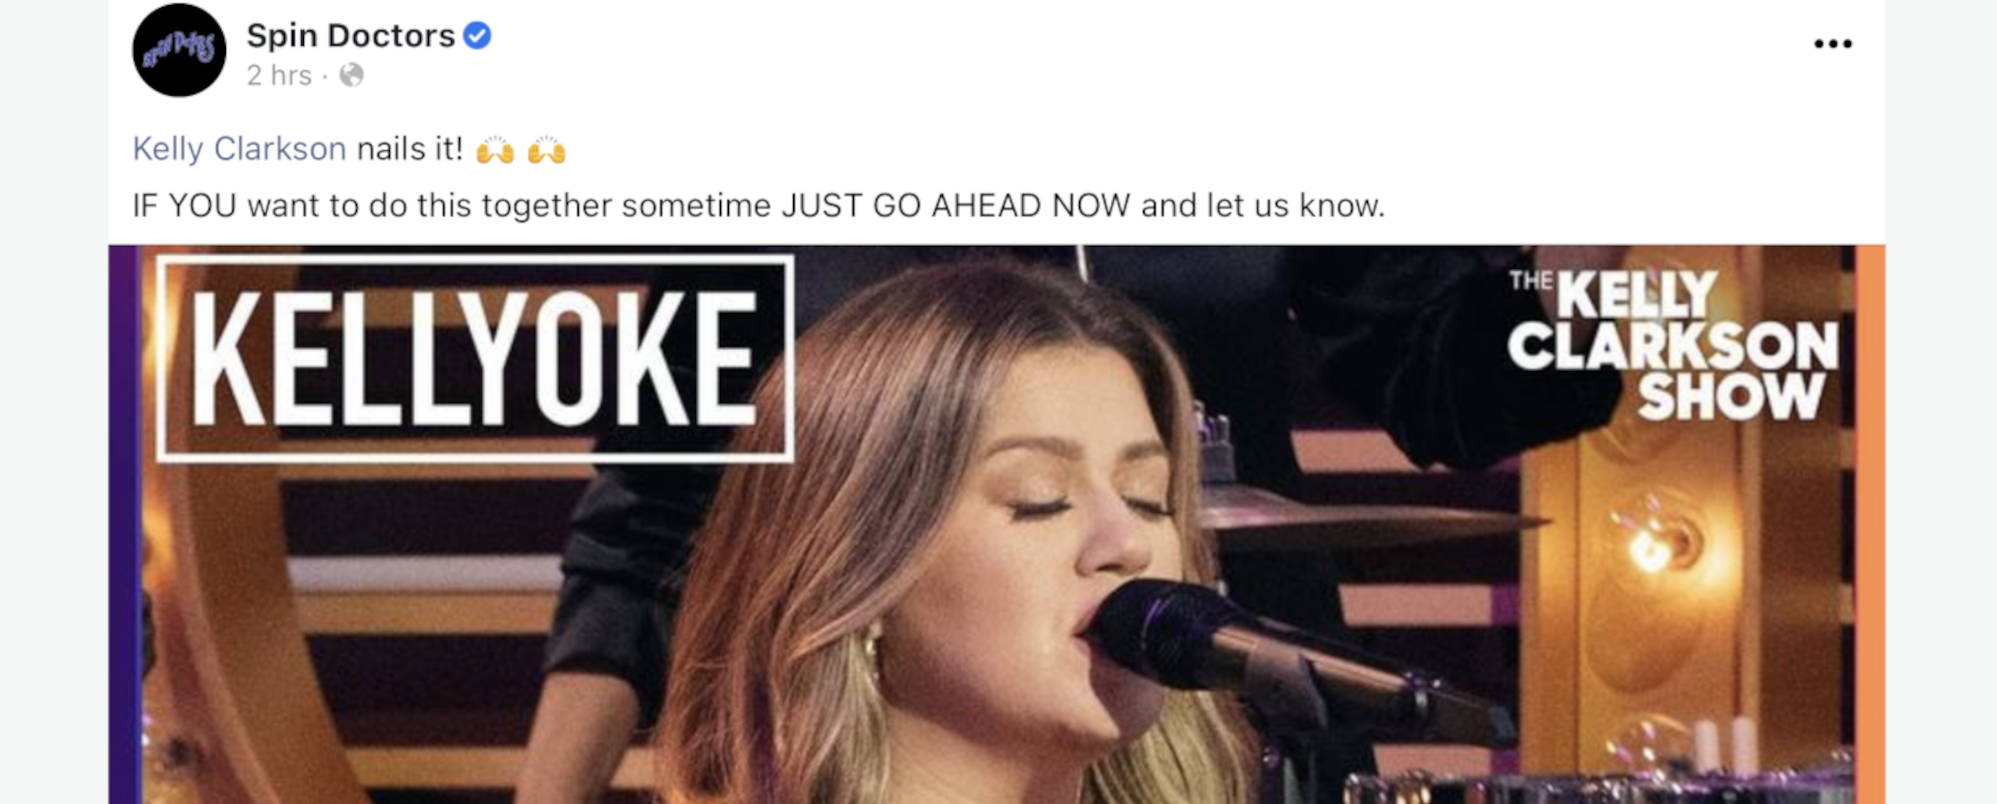 Kelly Clarkson Nails “Two Princes,” Gets Thumbs-Up From Spin Doctors